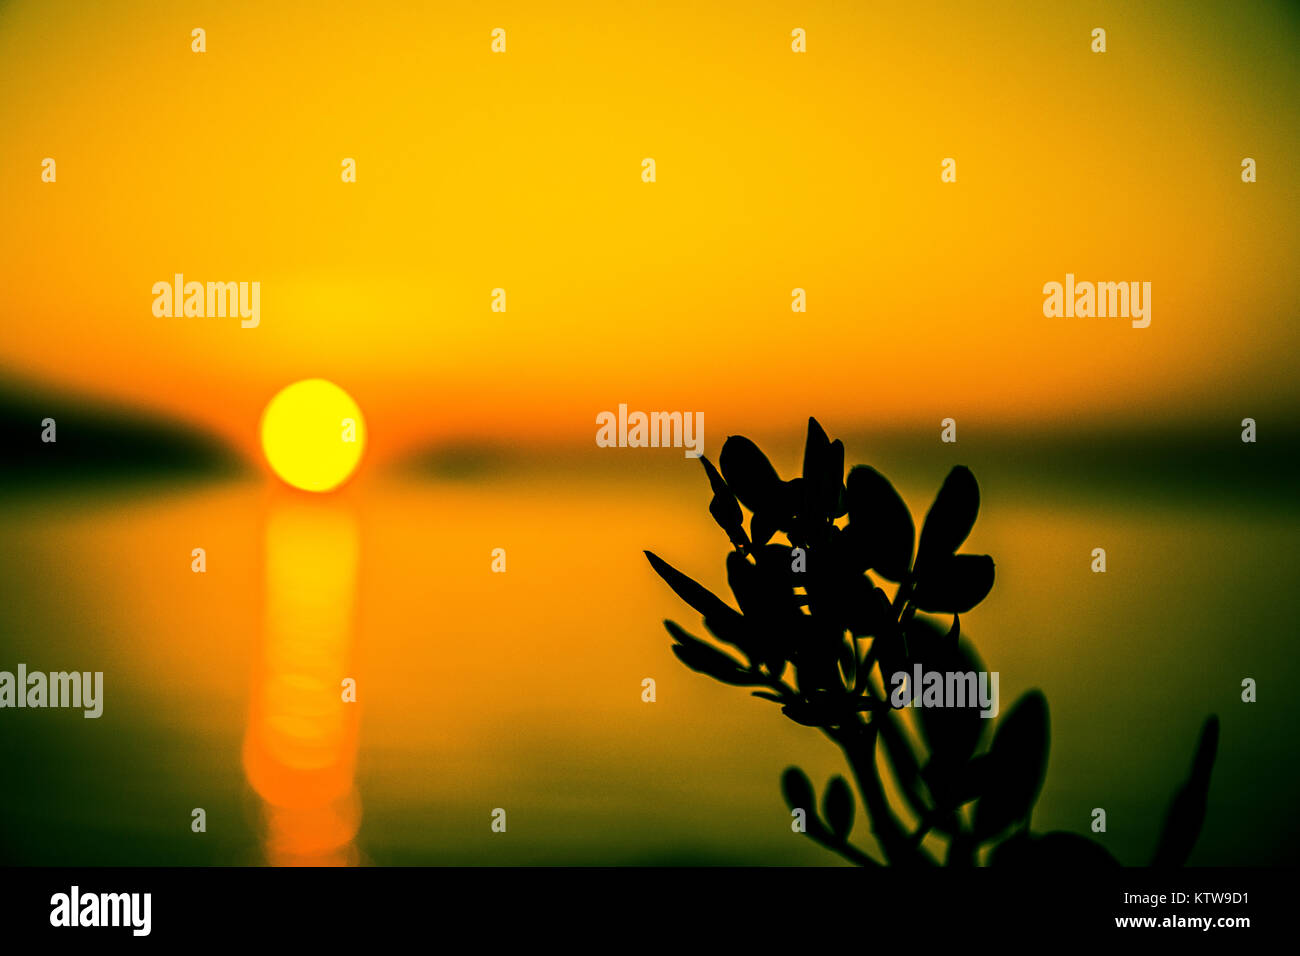 Amazing abstract background. Beautiful Abstract sunset colors somewhere in Croatia. Wild plant as main subject. Stock Photo